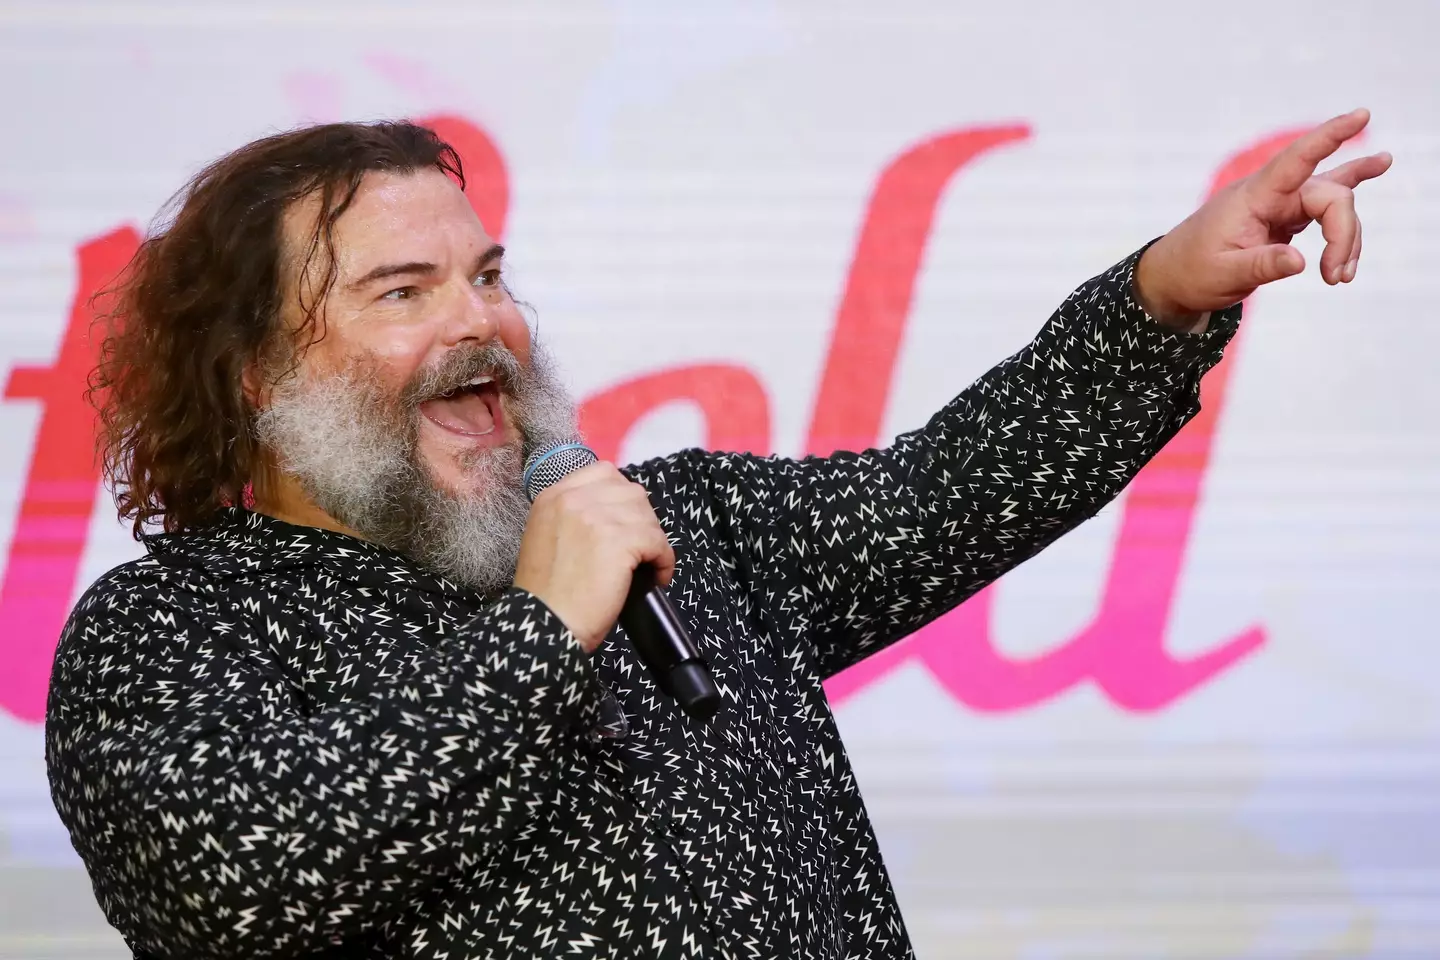 Jack Black explained has family naming traditions. (Lisa Maree Williams/Getty Images)